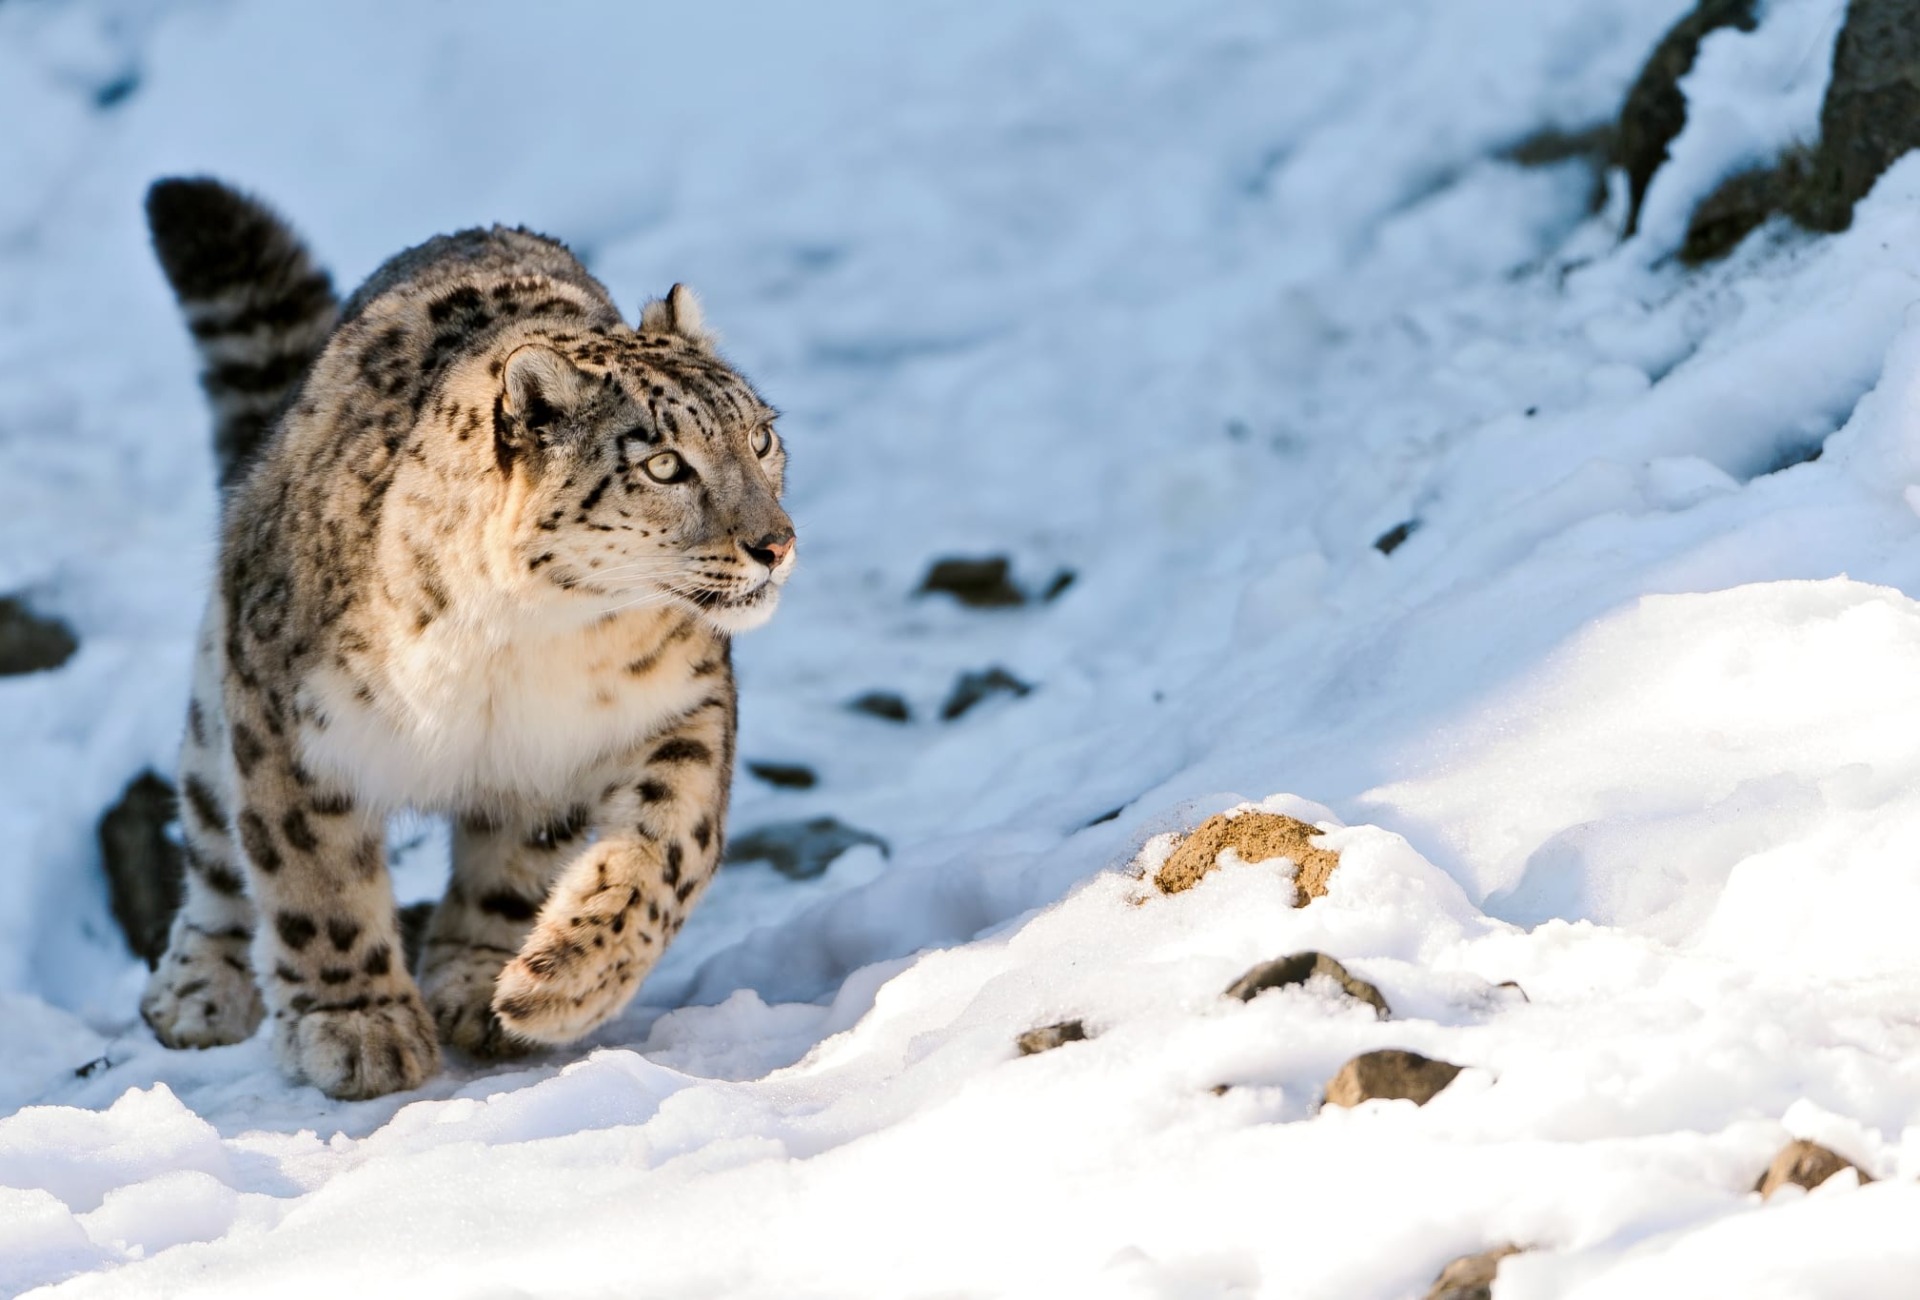 Creating a Vast Conservation Corridor for the Snow Leopard